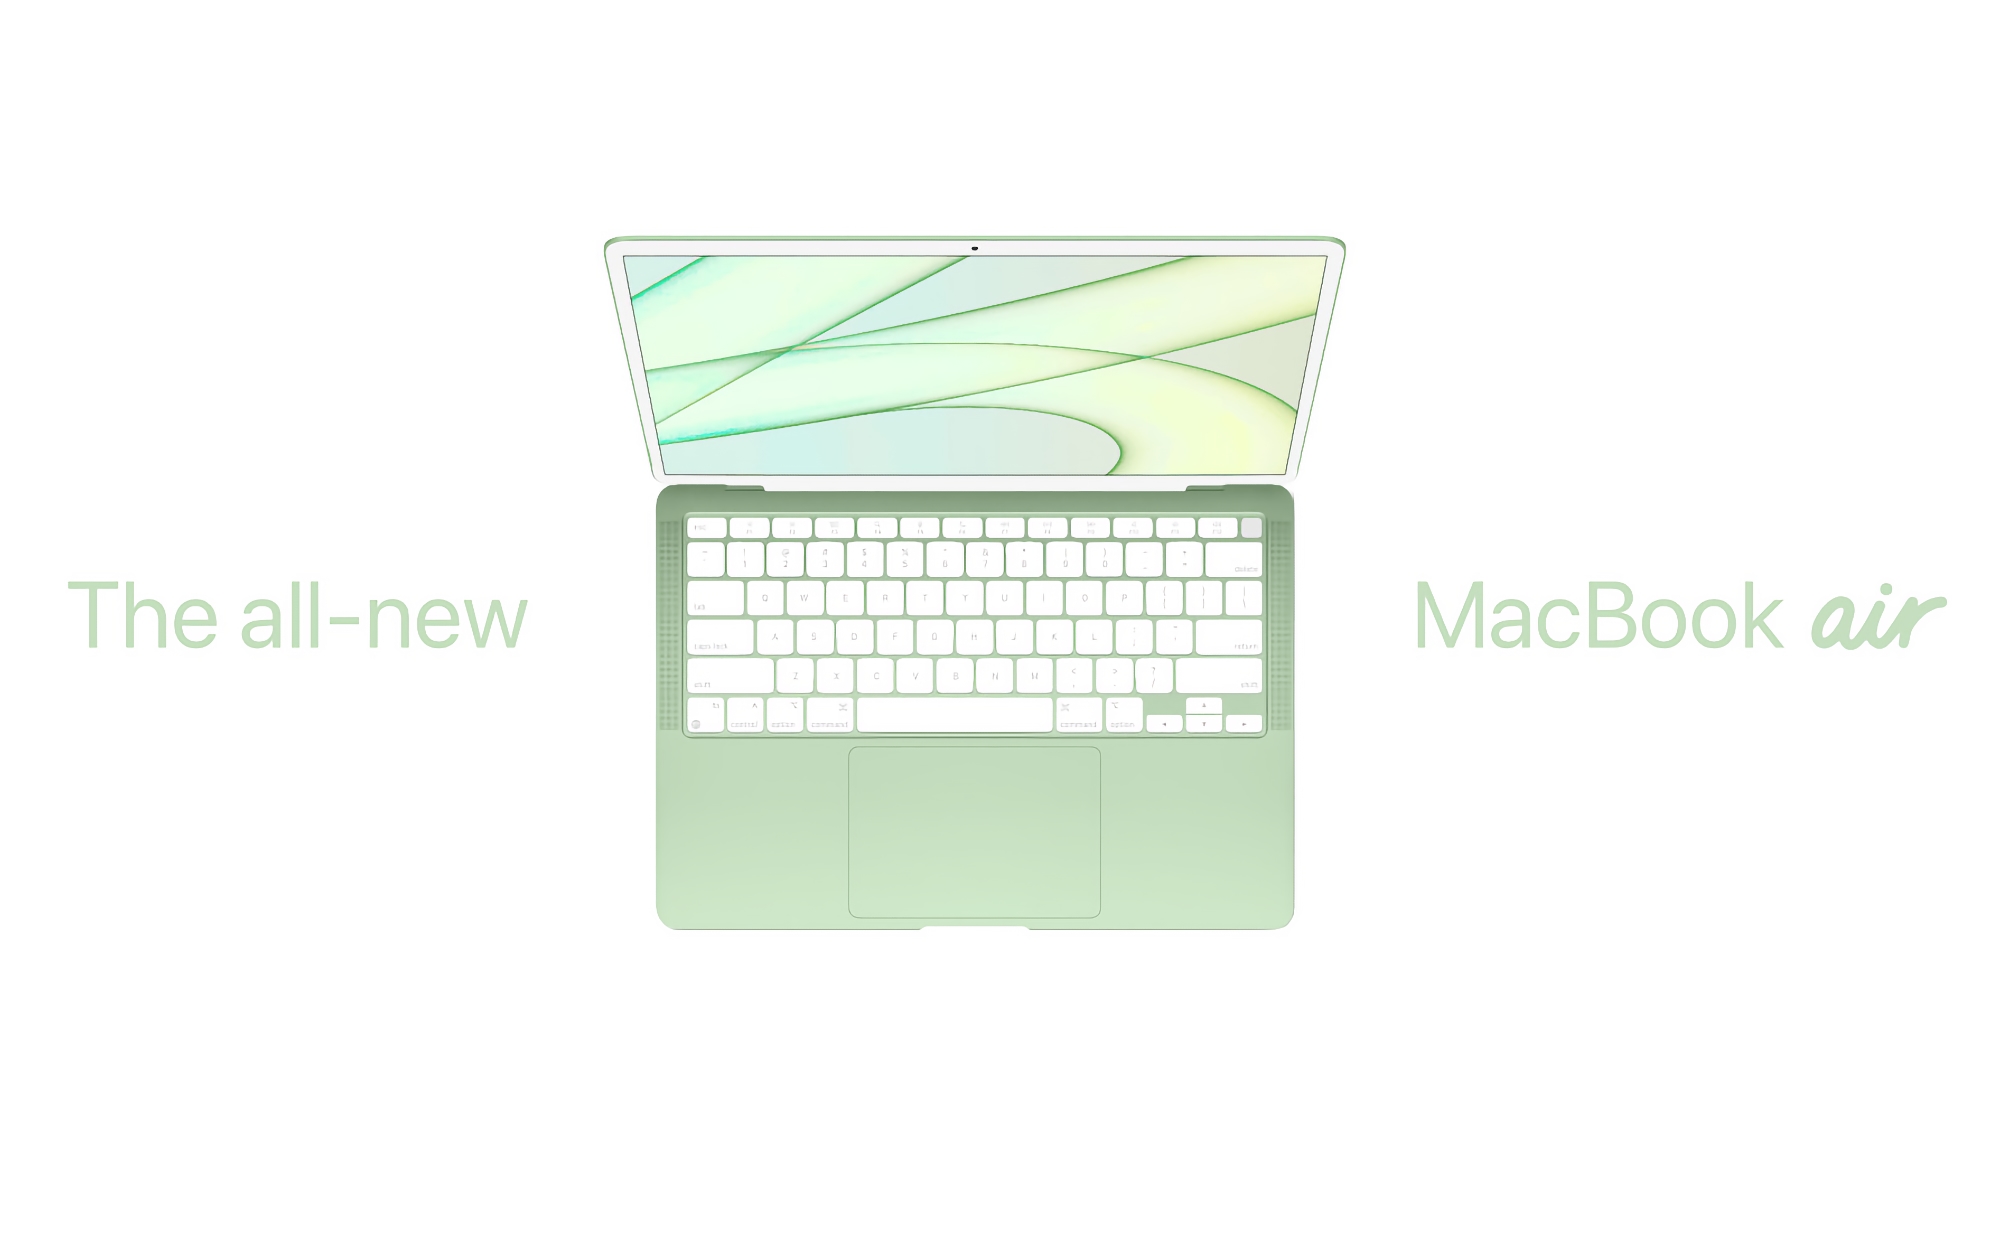 Bloomberg: Apple will show updated MacBook Air with M2 chip at WWDC 2022